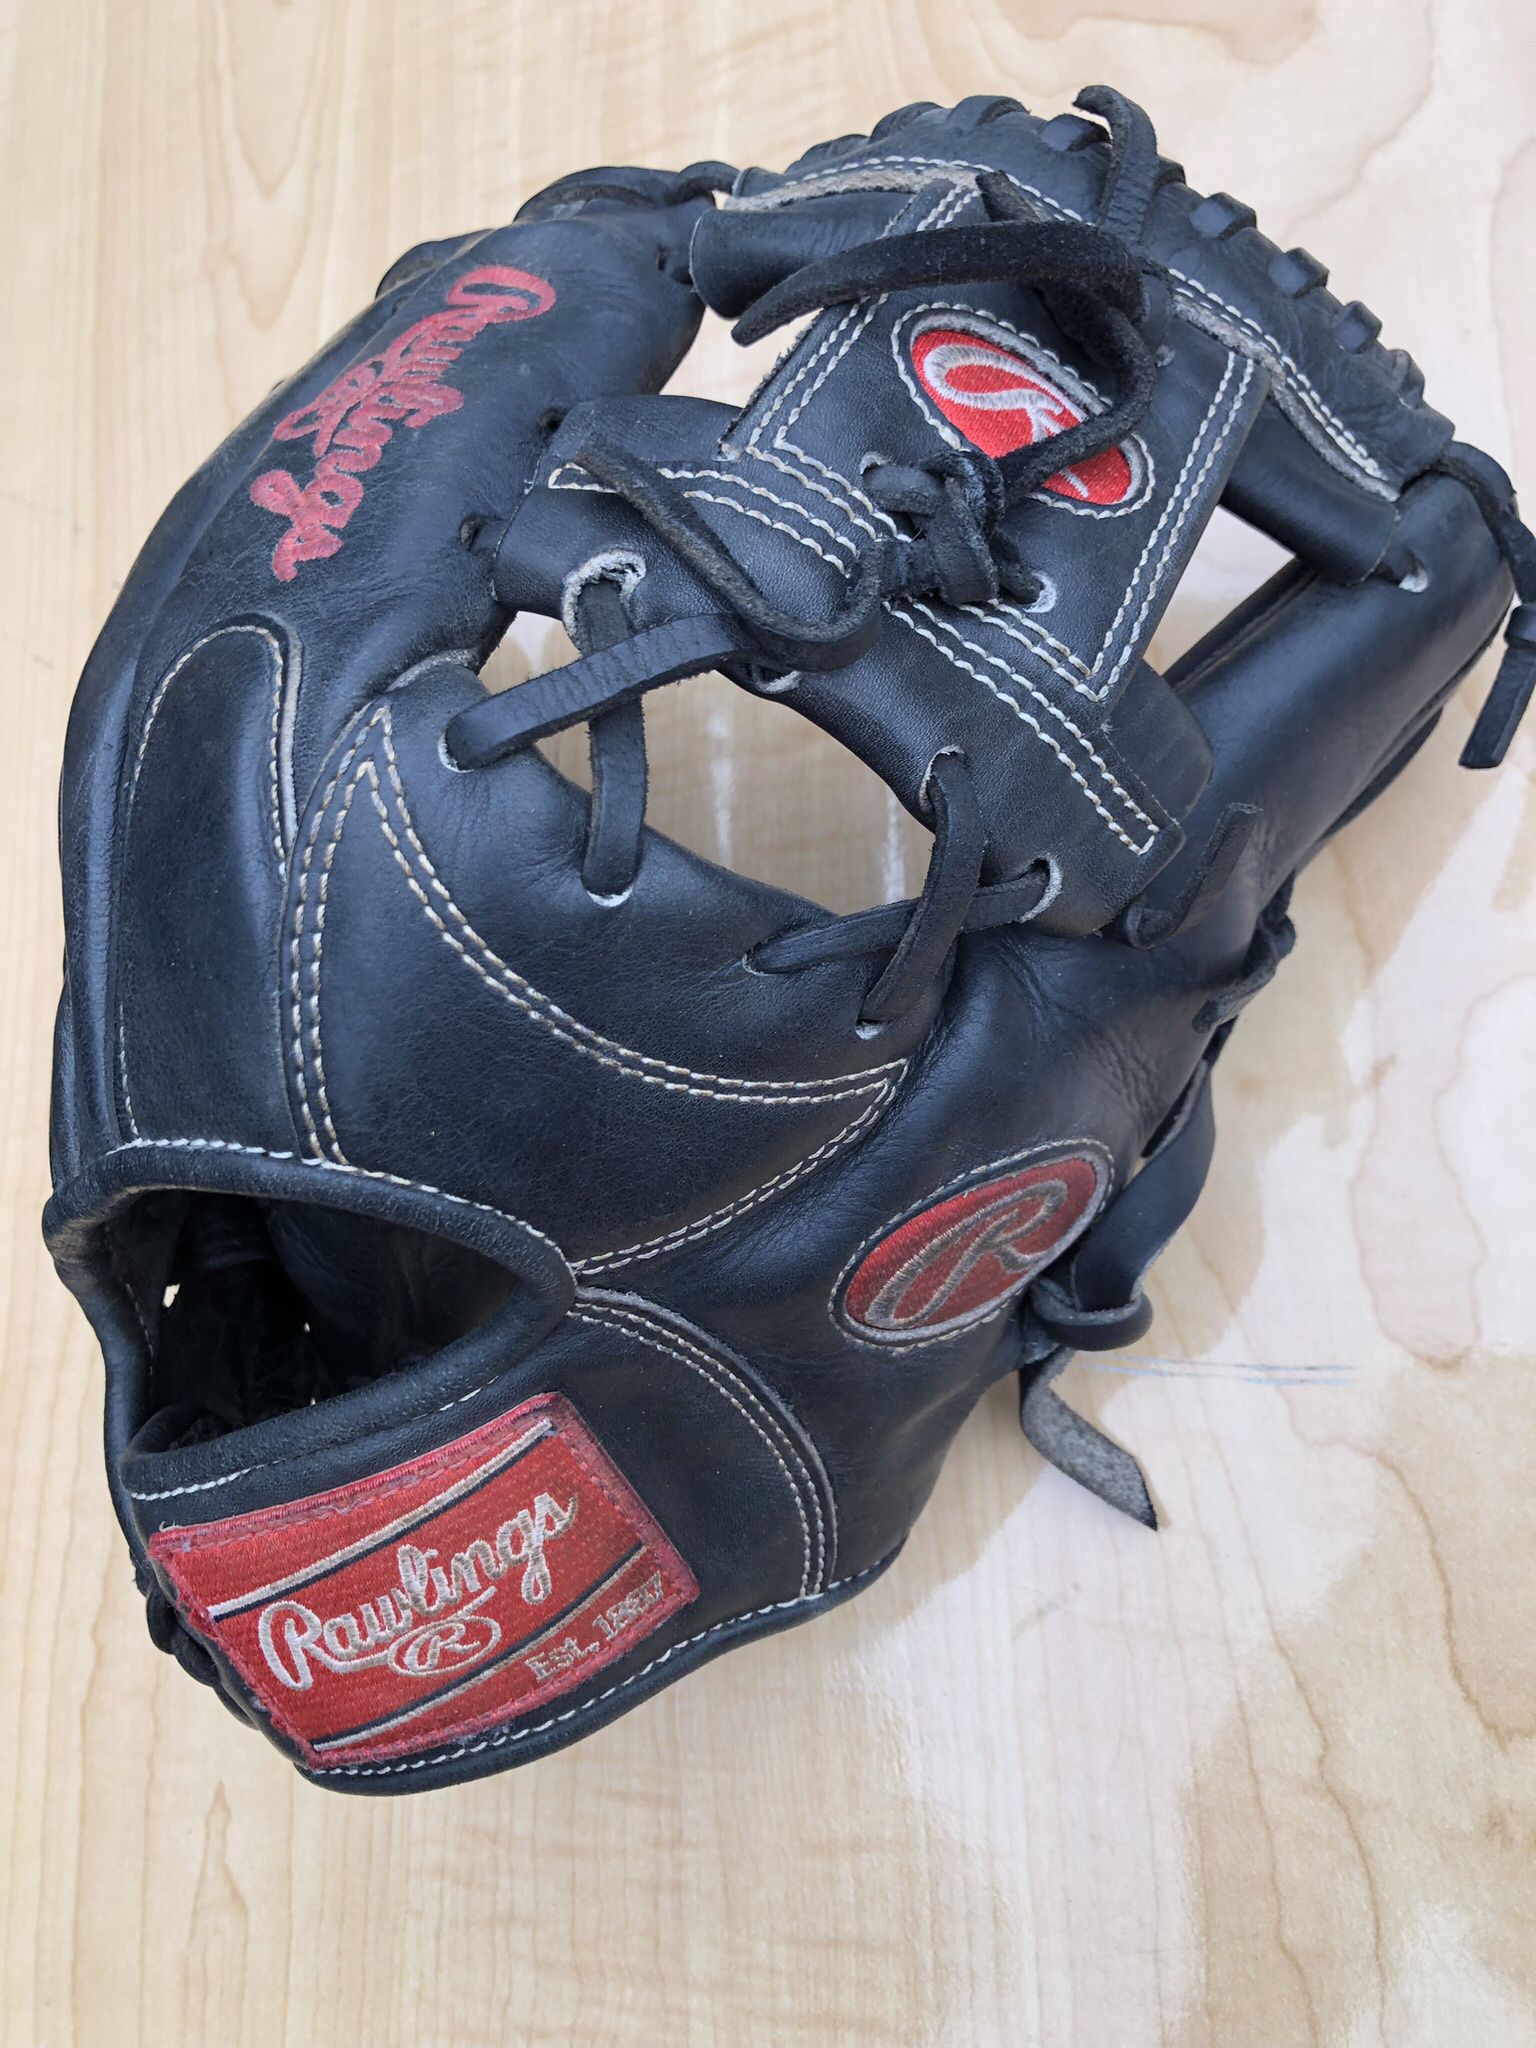 Rawlings Heart Of The Hide Baseball Glove Sz 11 1/4” In Excellent Condition #PRONP2JB Have More Equipment $140 firm